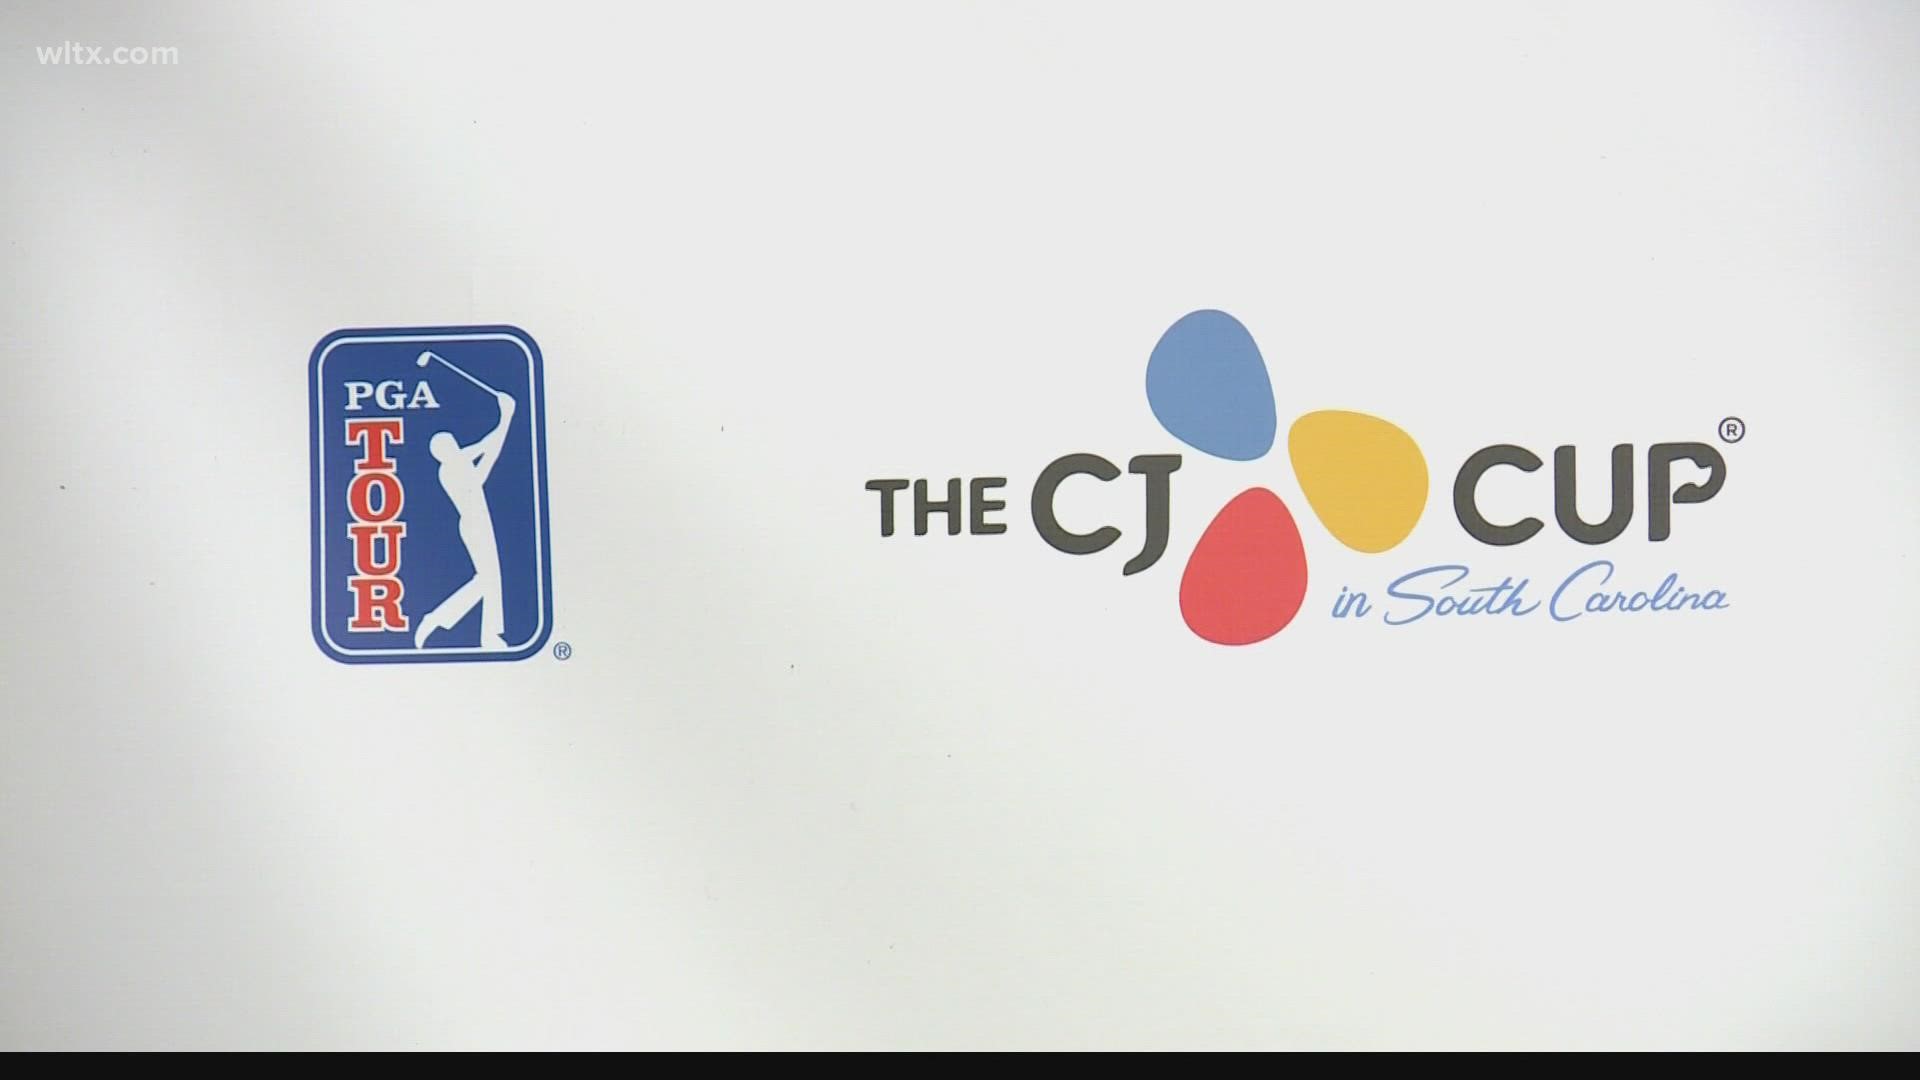 The Palmetto State will have a second PGA Tour event on the schedule when the CJ Cup comes to Jasper County in October.